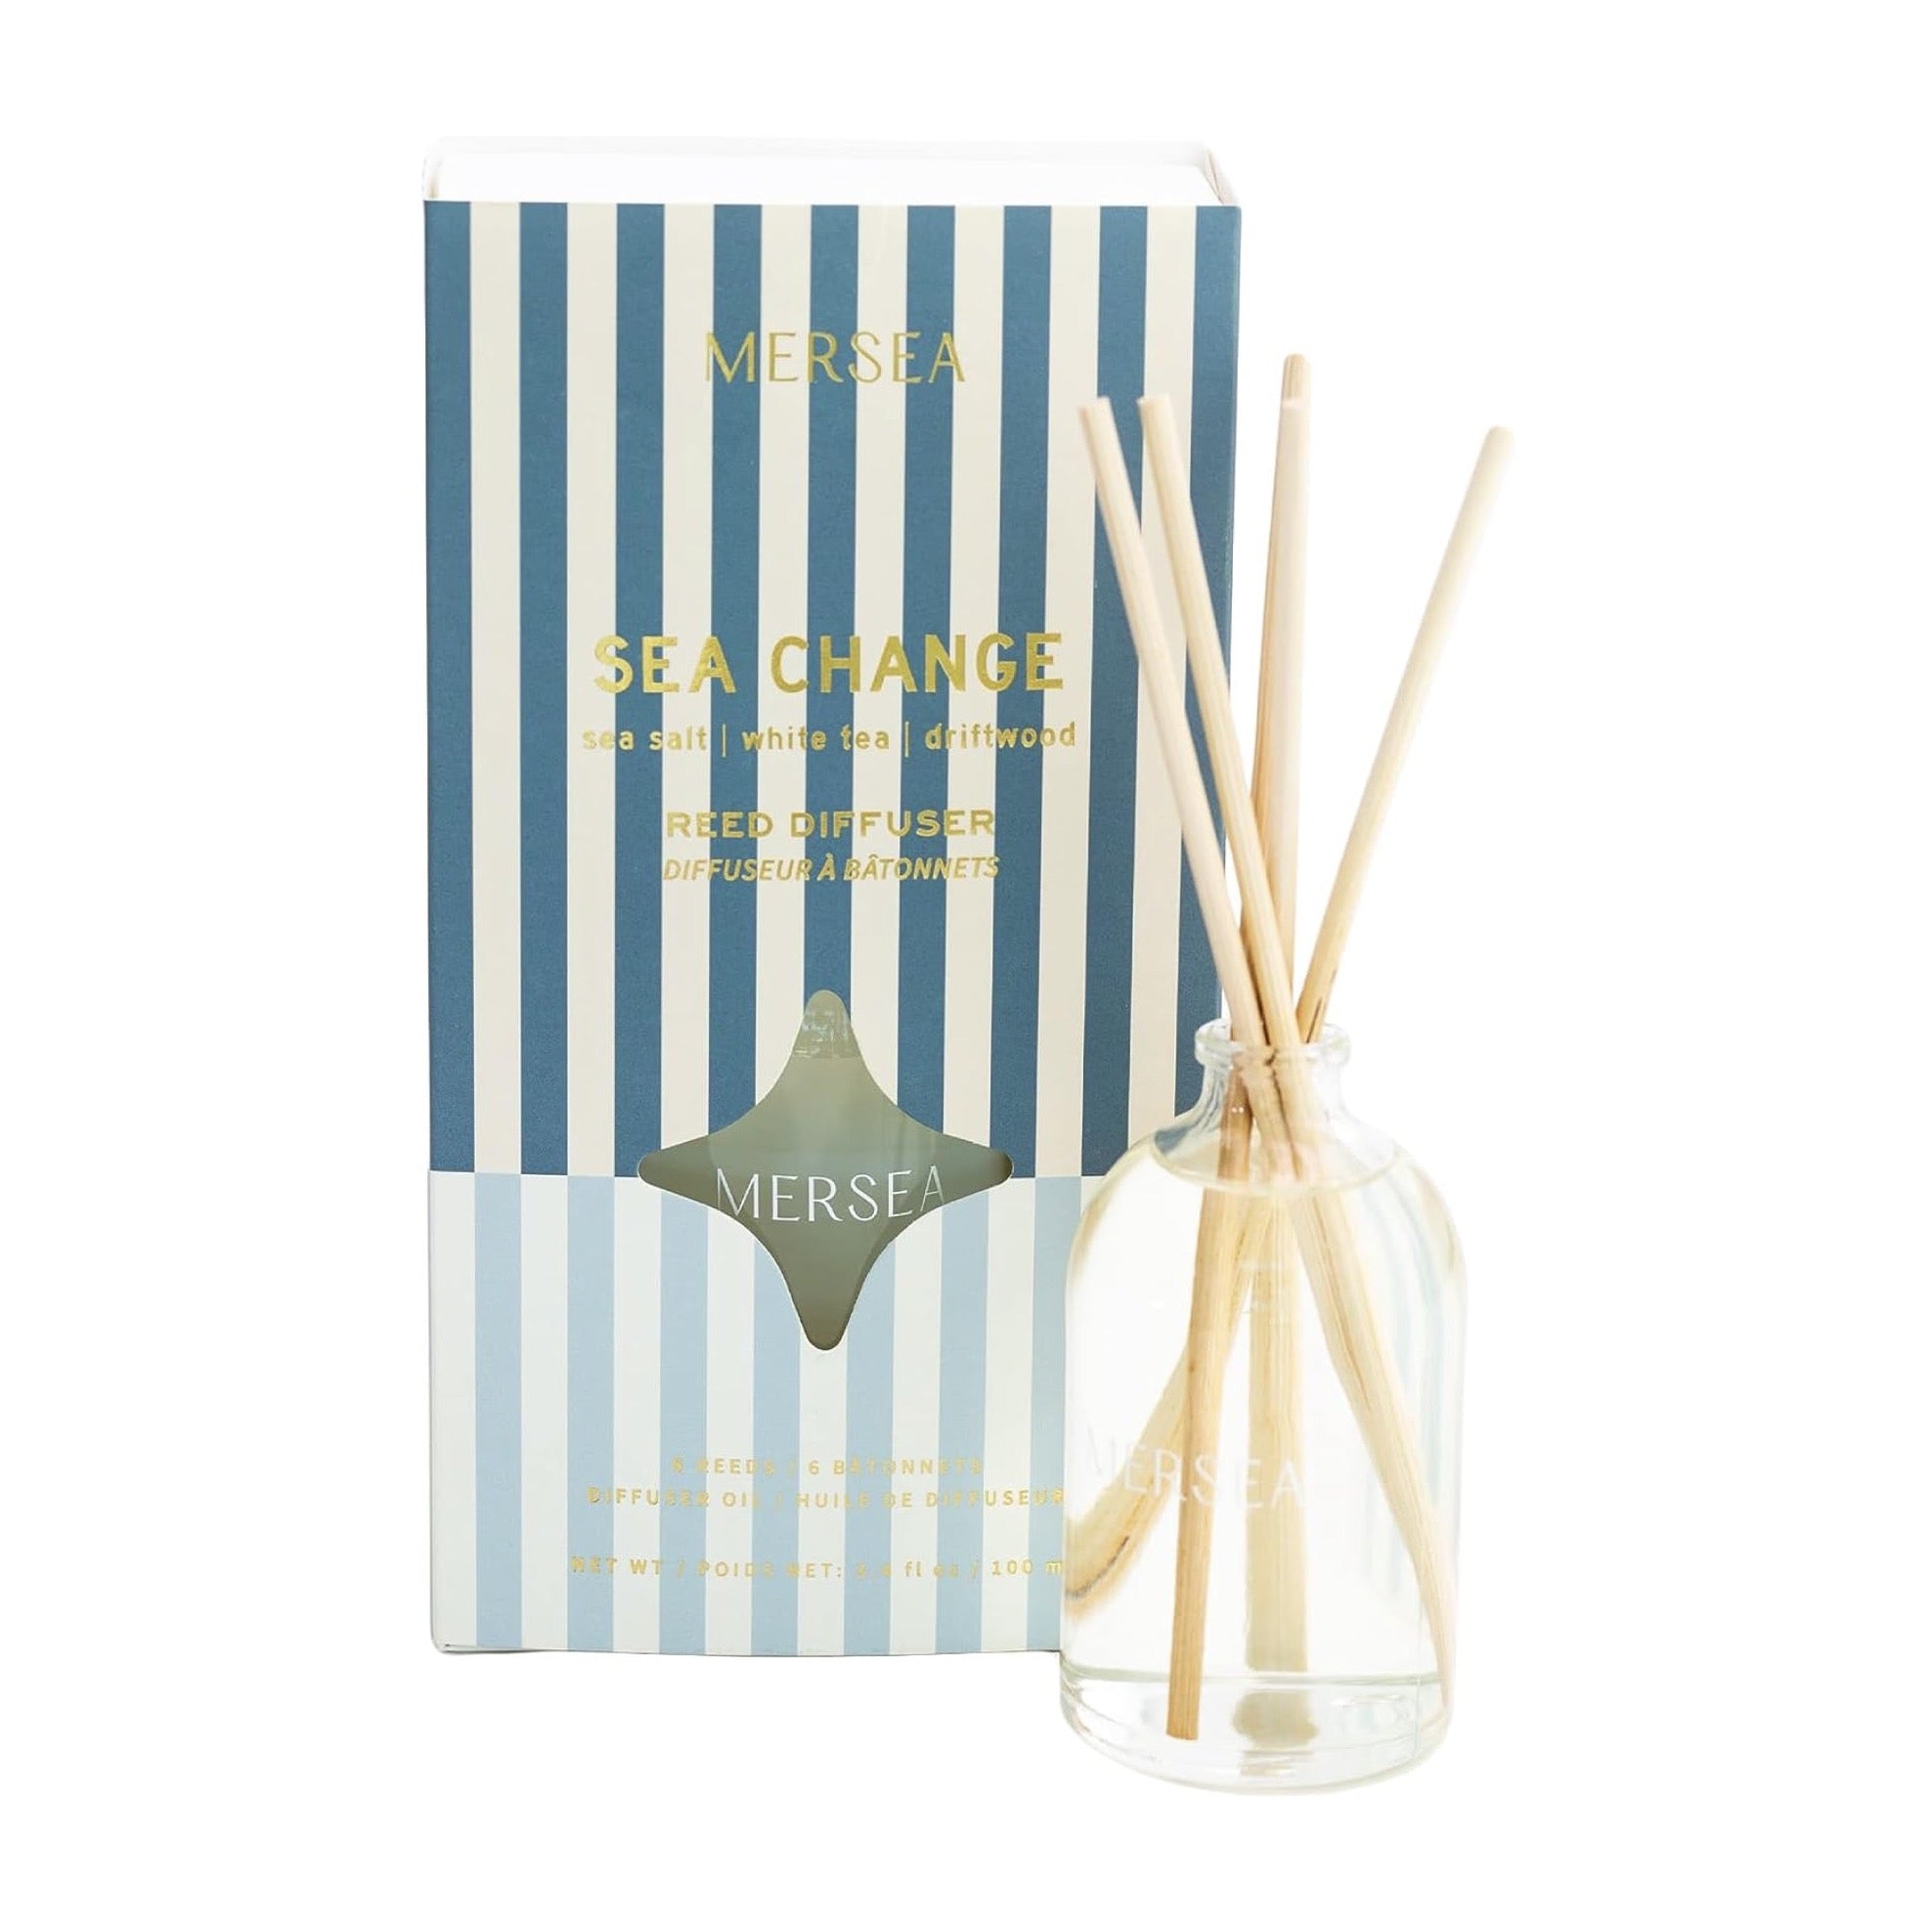 blue vertically striped box with gold text. reed diffuser in front of it